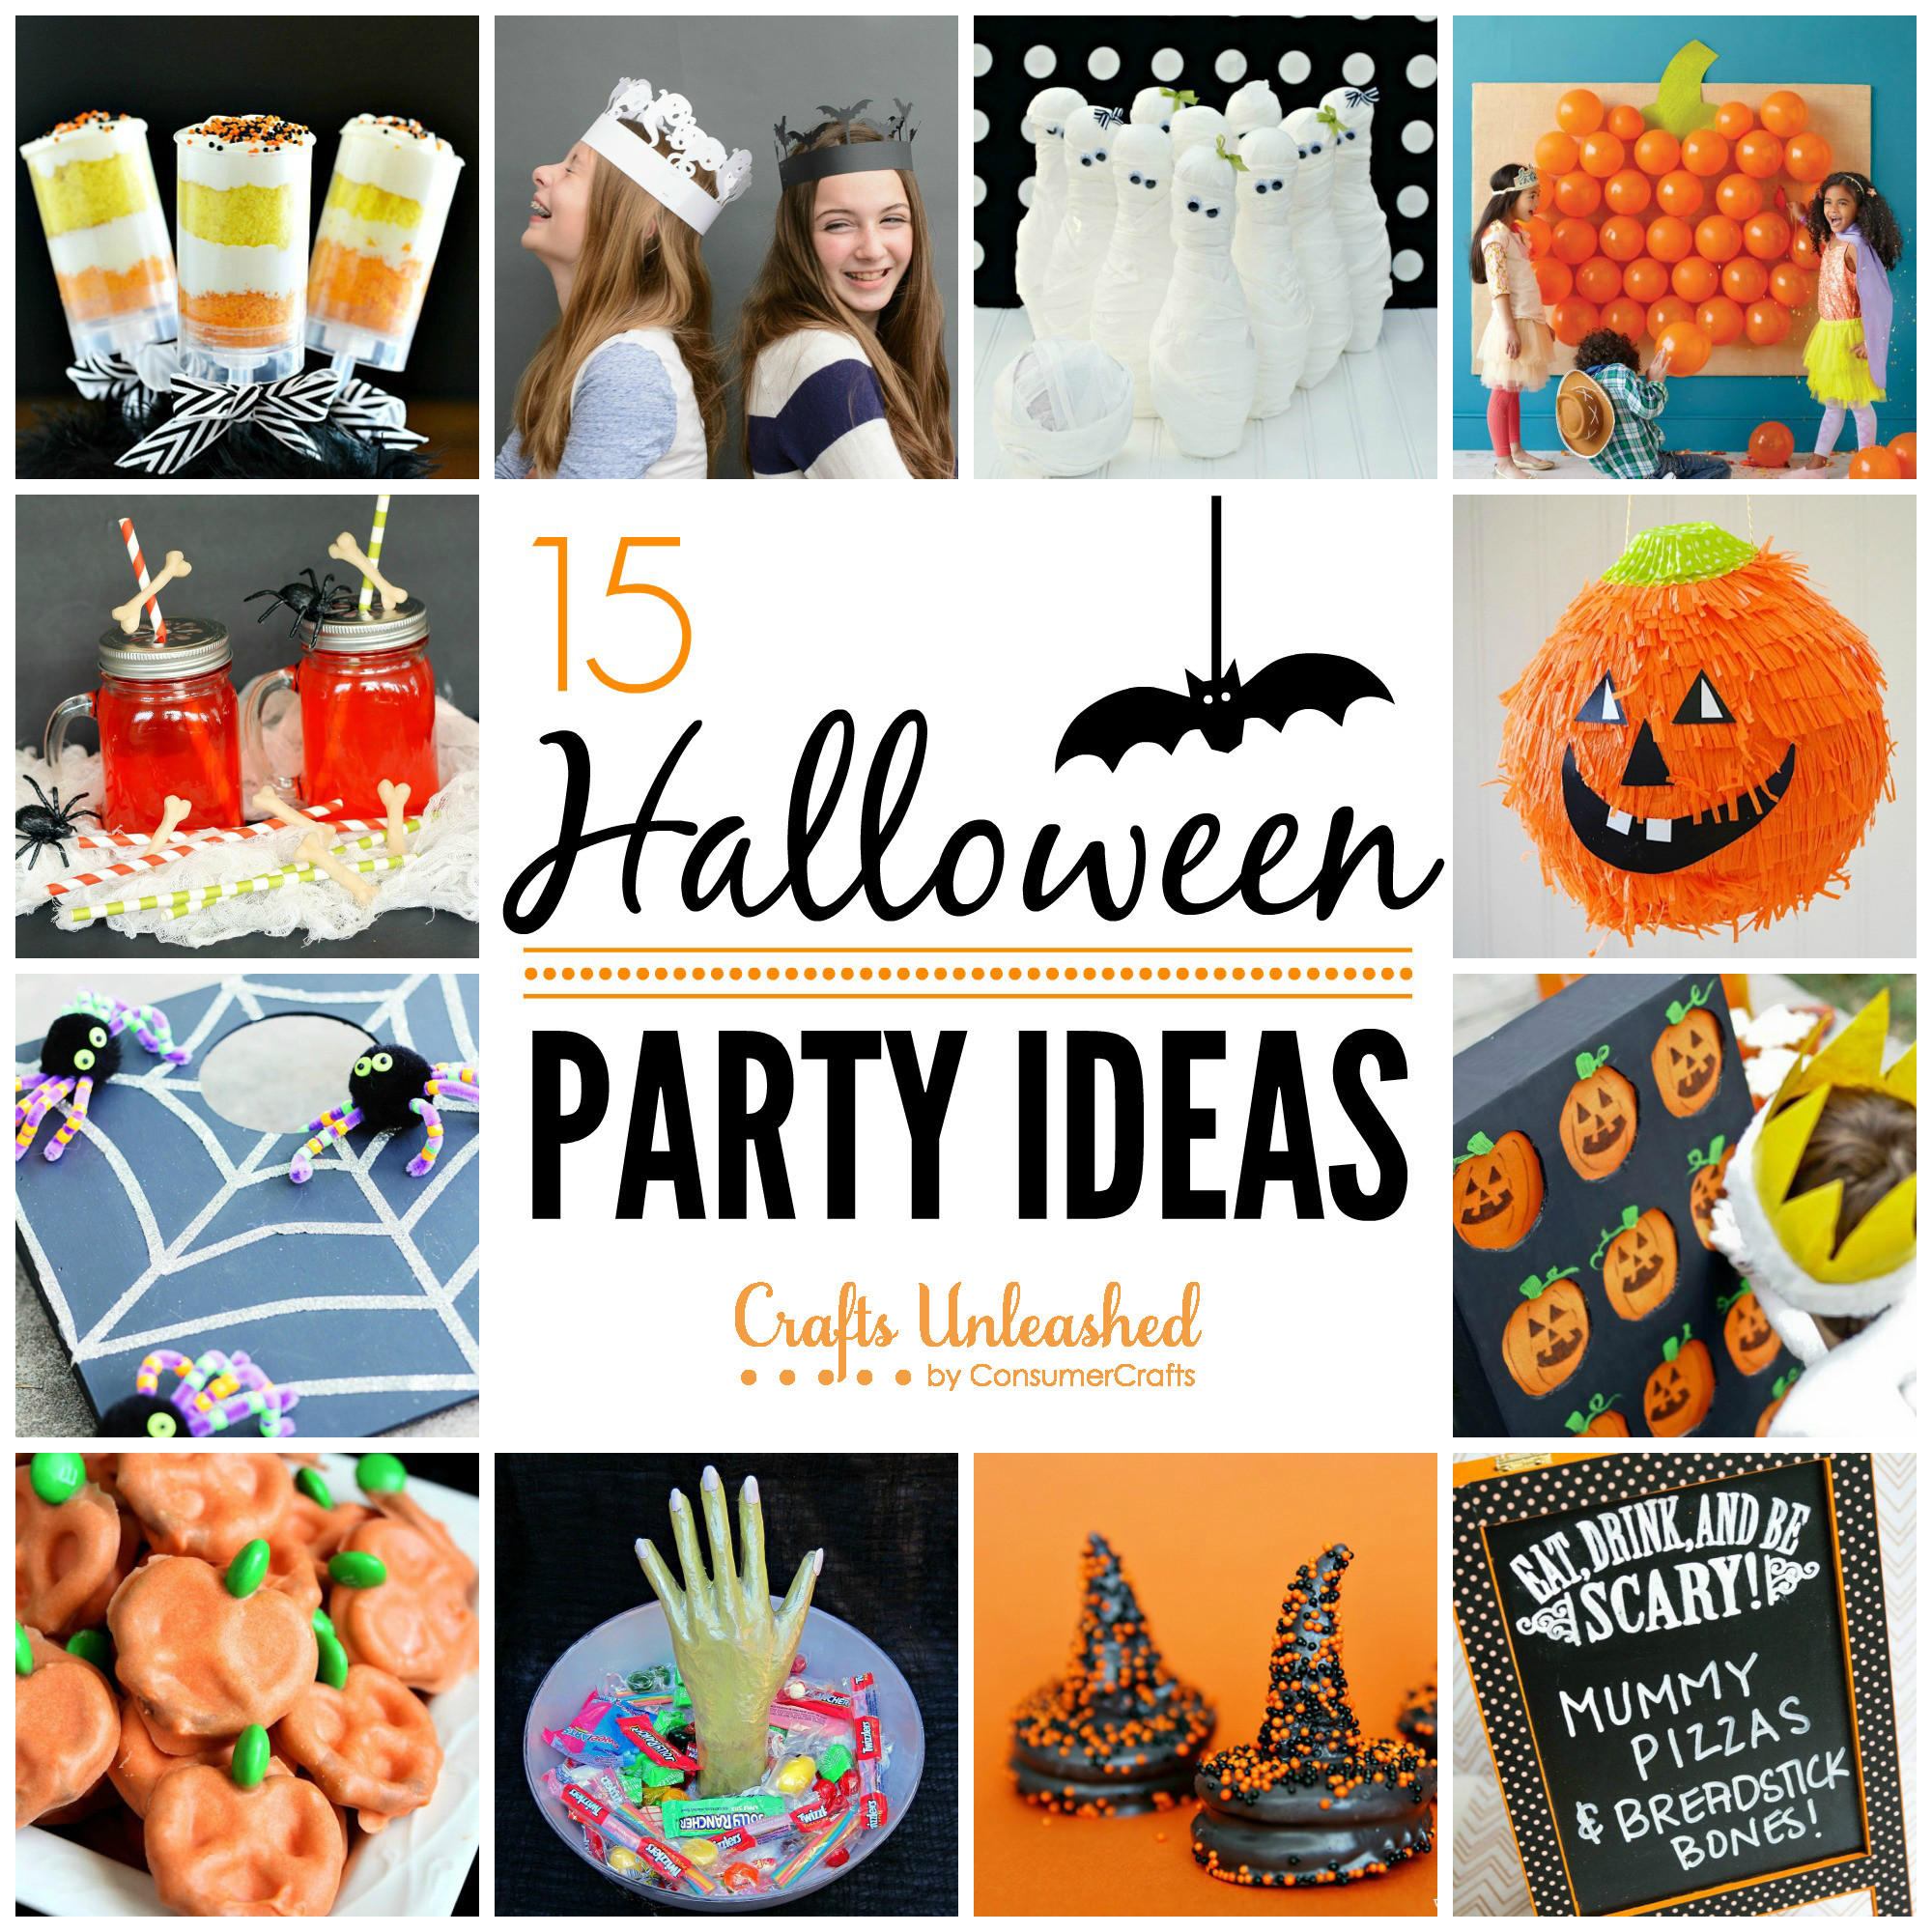 Diy Halloween Party Ideas
 Halloween Party Ideas Crafts Unleashed